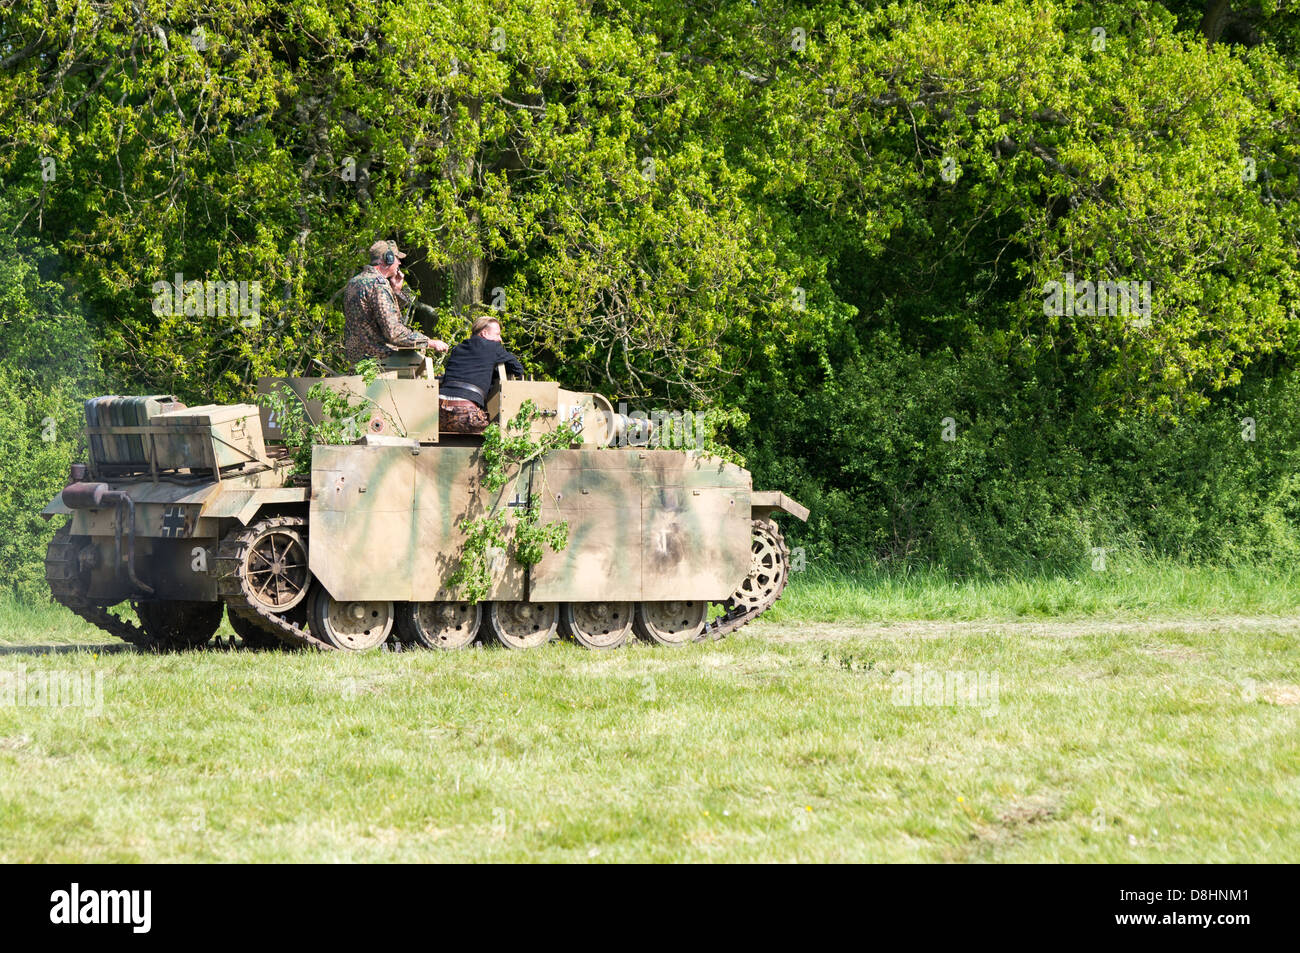 Overlord, D-Day re-enactment at Denmead 2013. A German Panzer tank moves into position. Stock Photo